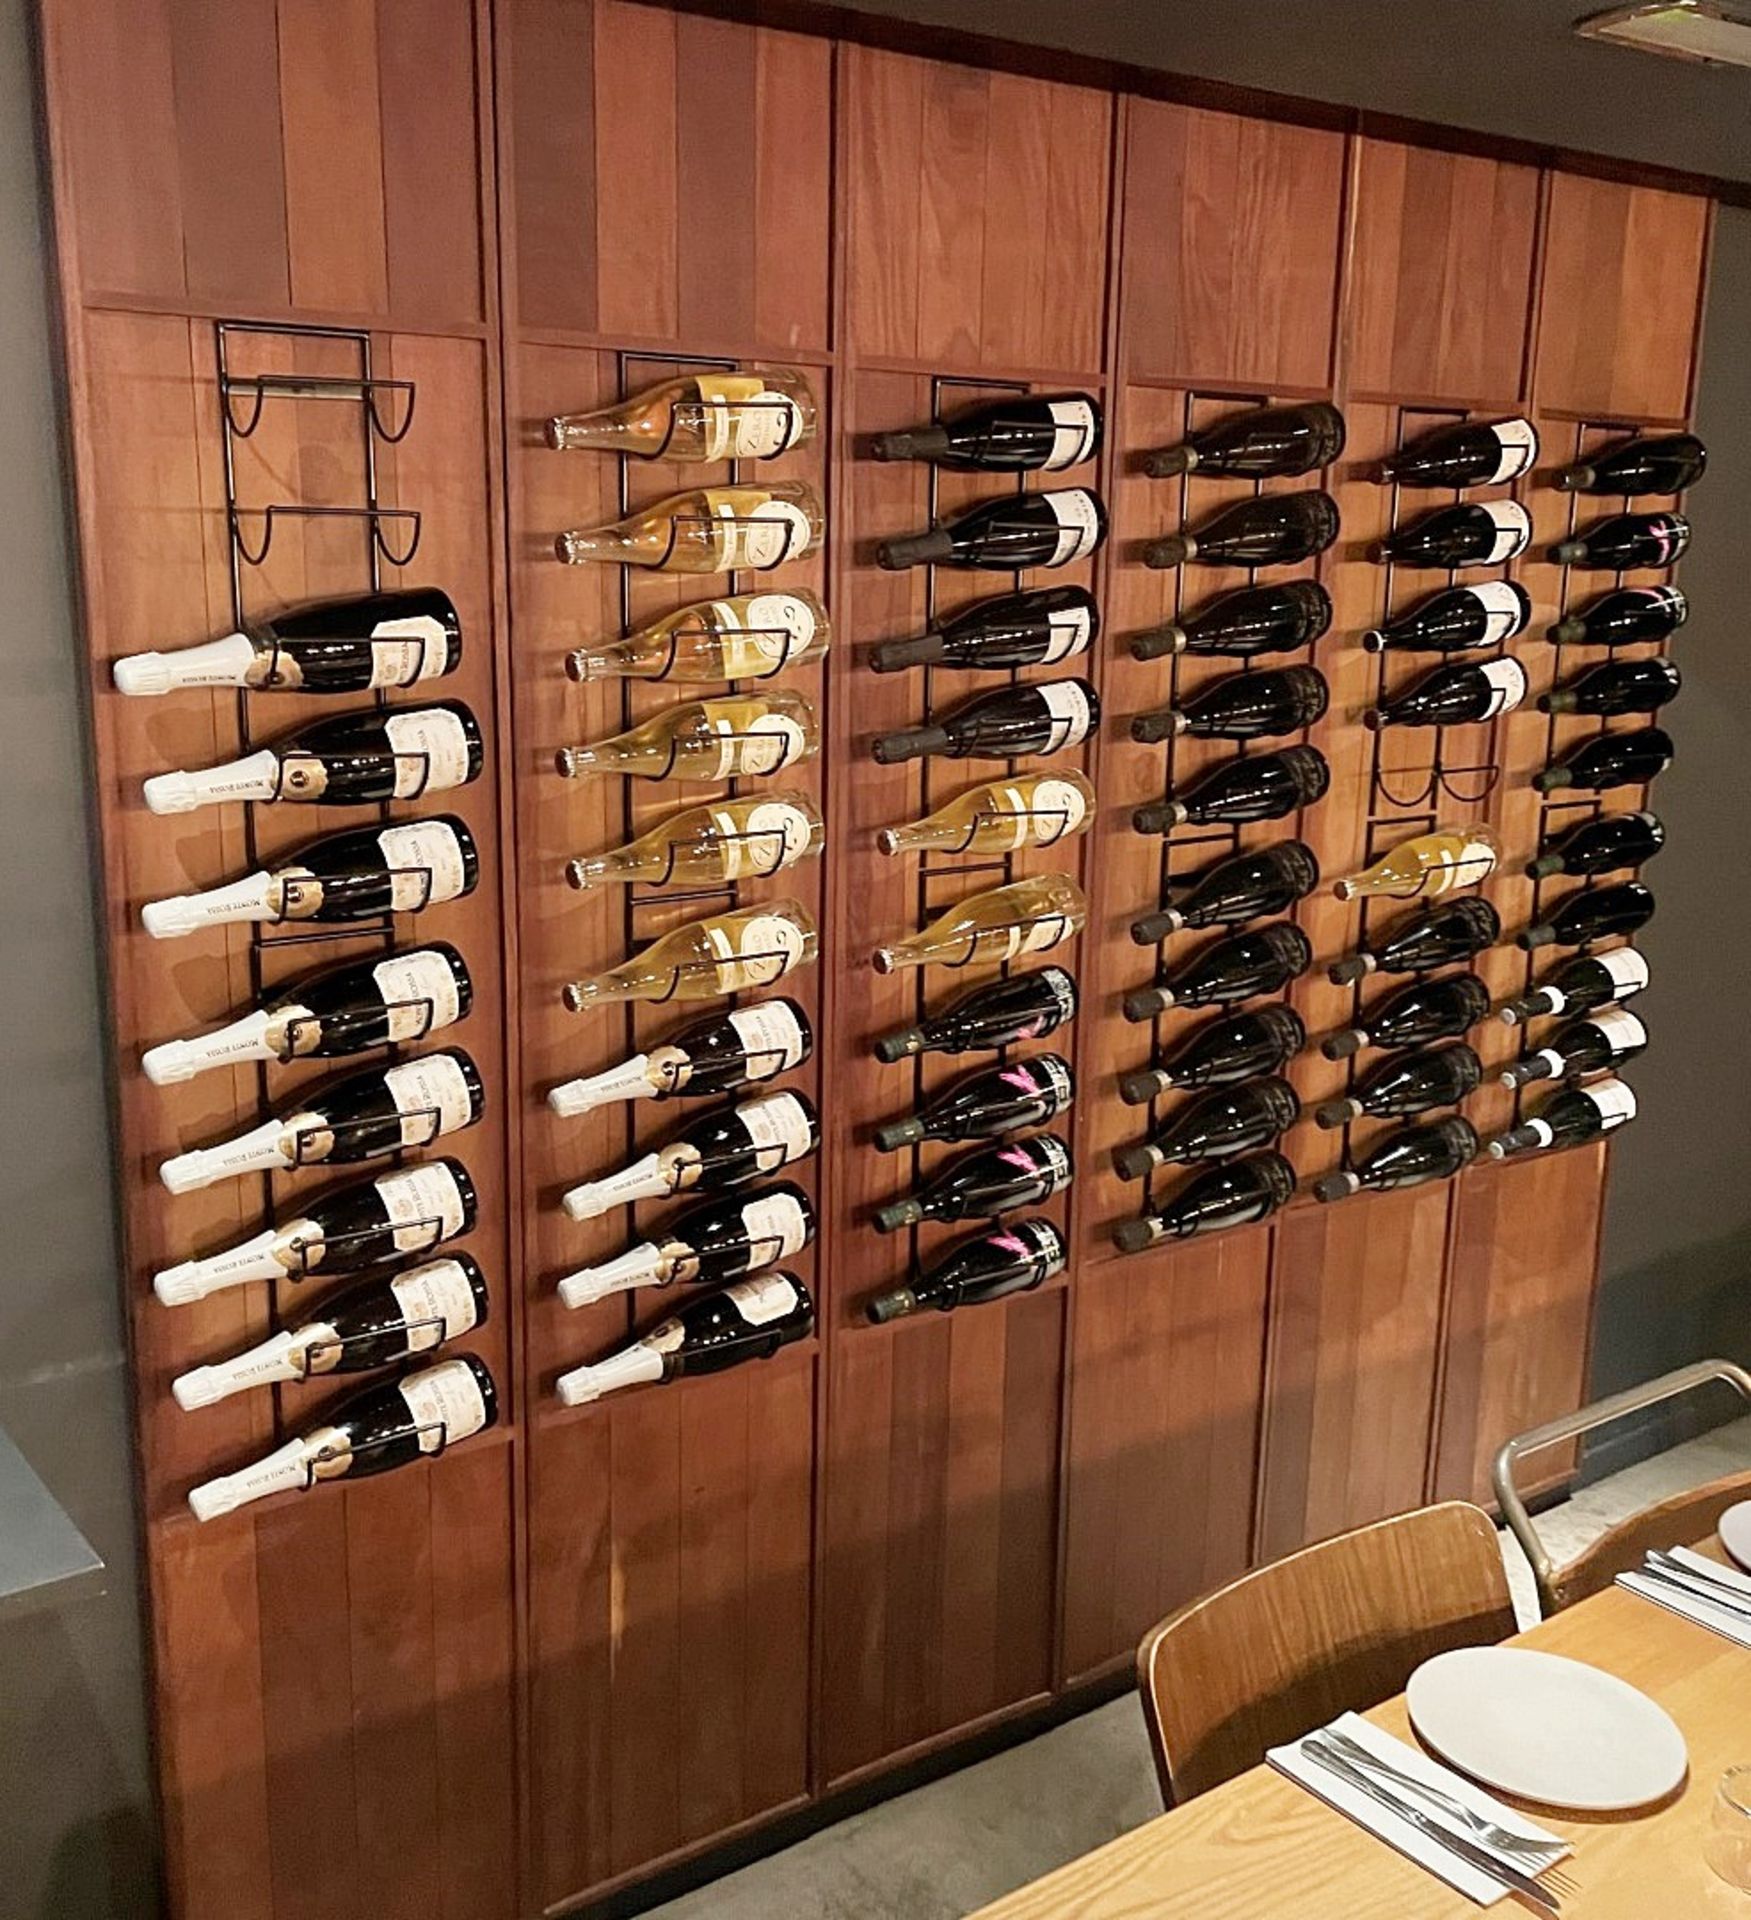 6 x Wooden Wall Panels With Wine Racks Boasting A Combined Capacity Of 60 x Bottles